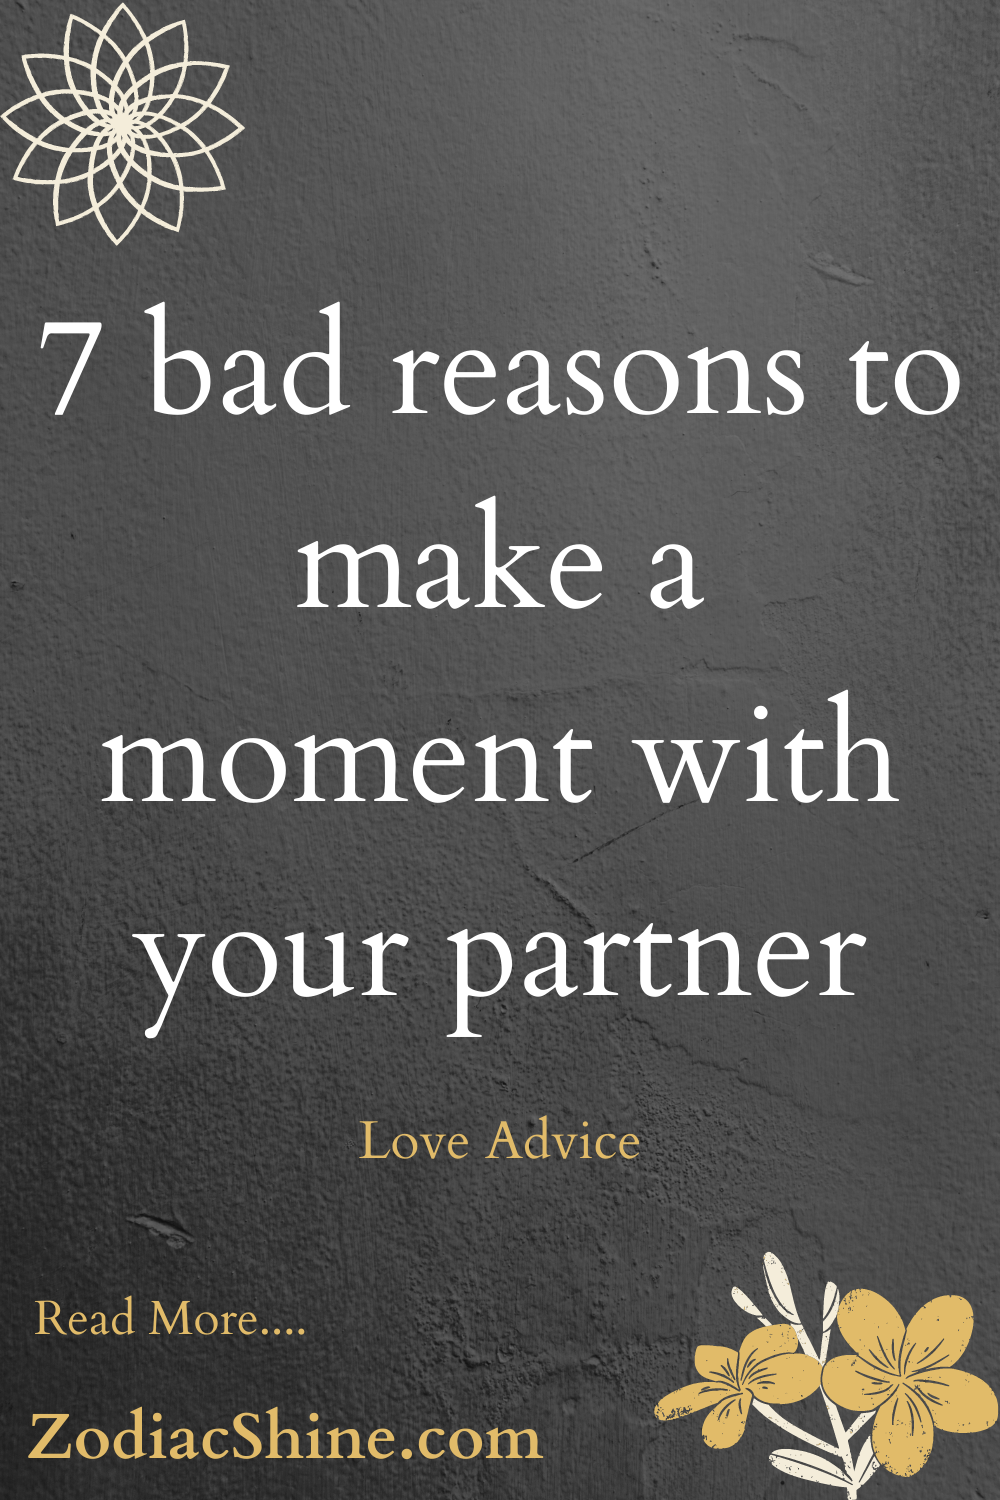 7 bad reasons to make a moments with your partner